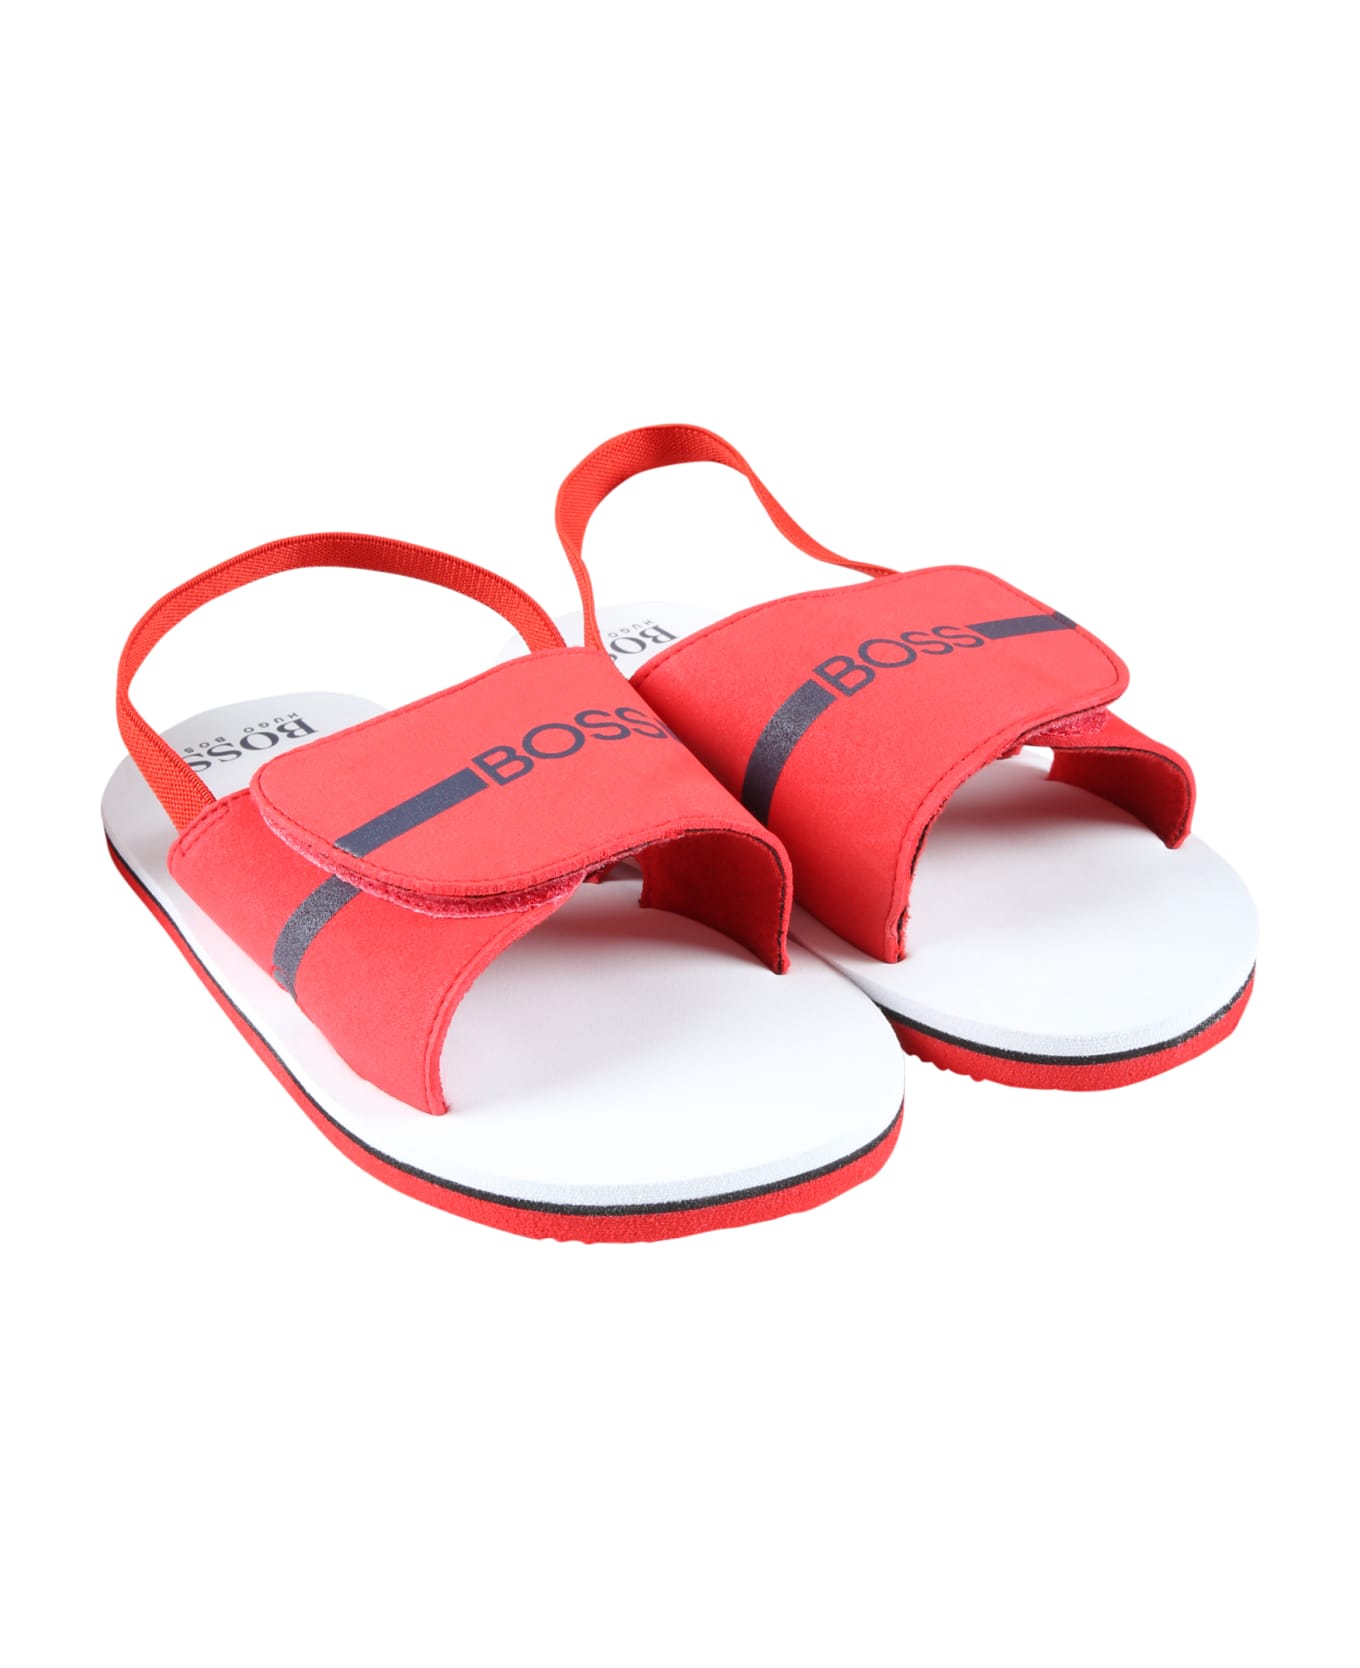 Hugo Boss Red Sandals For Boy With Blue Logo - Red